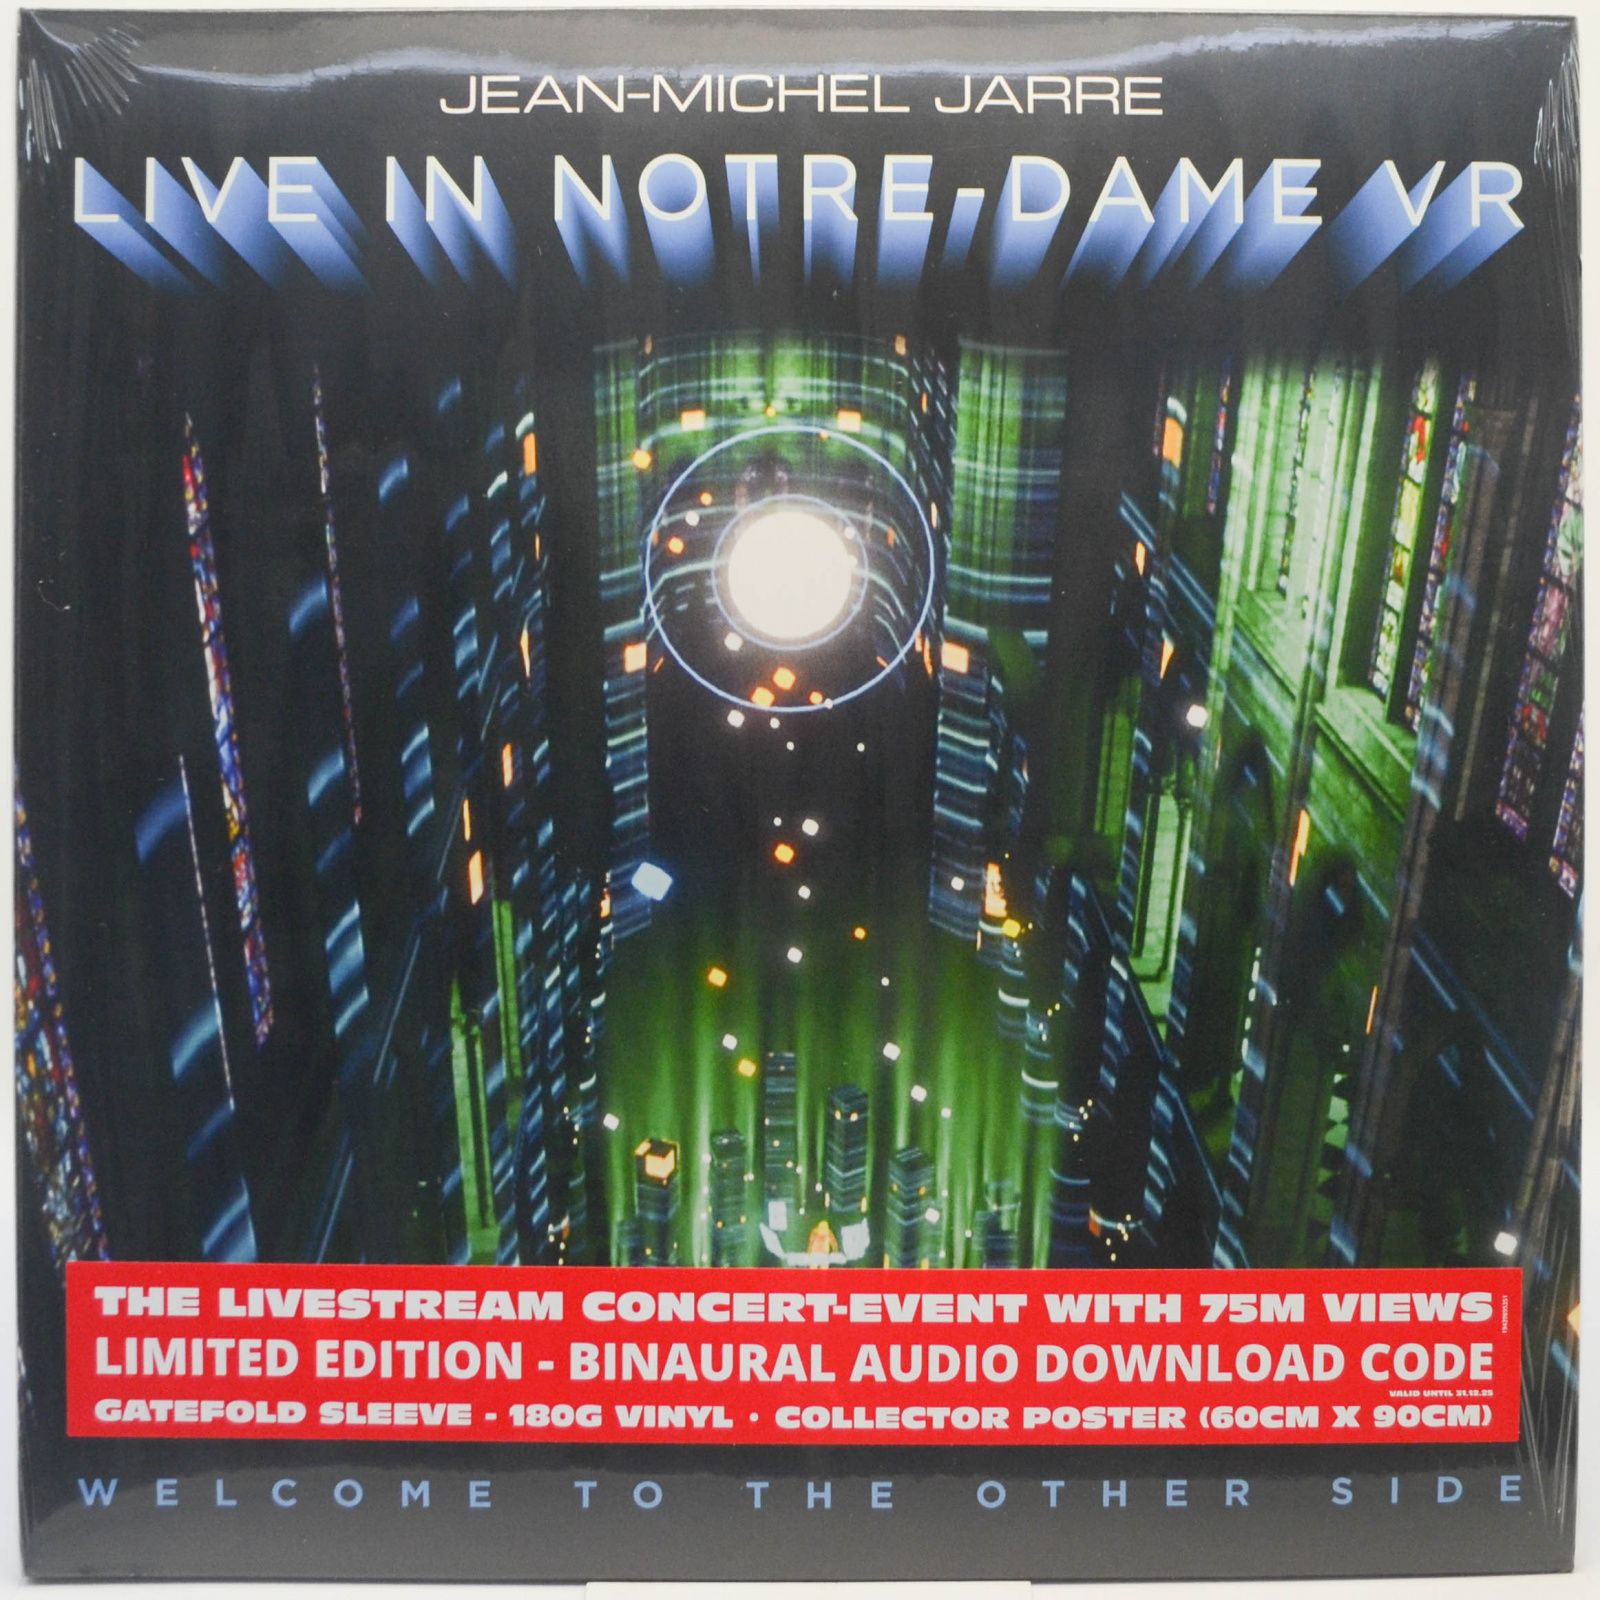 Jean-Michel Jarre — Welcome To The Other Side - Live In Notre-Dame VR, 2021